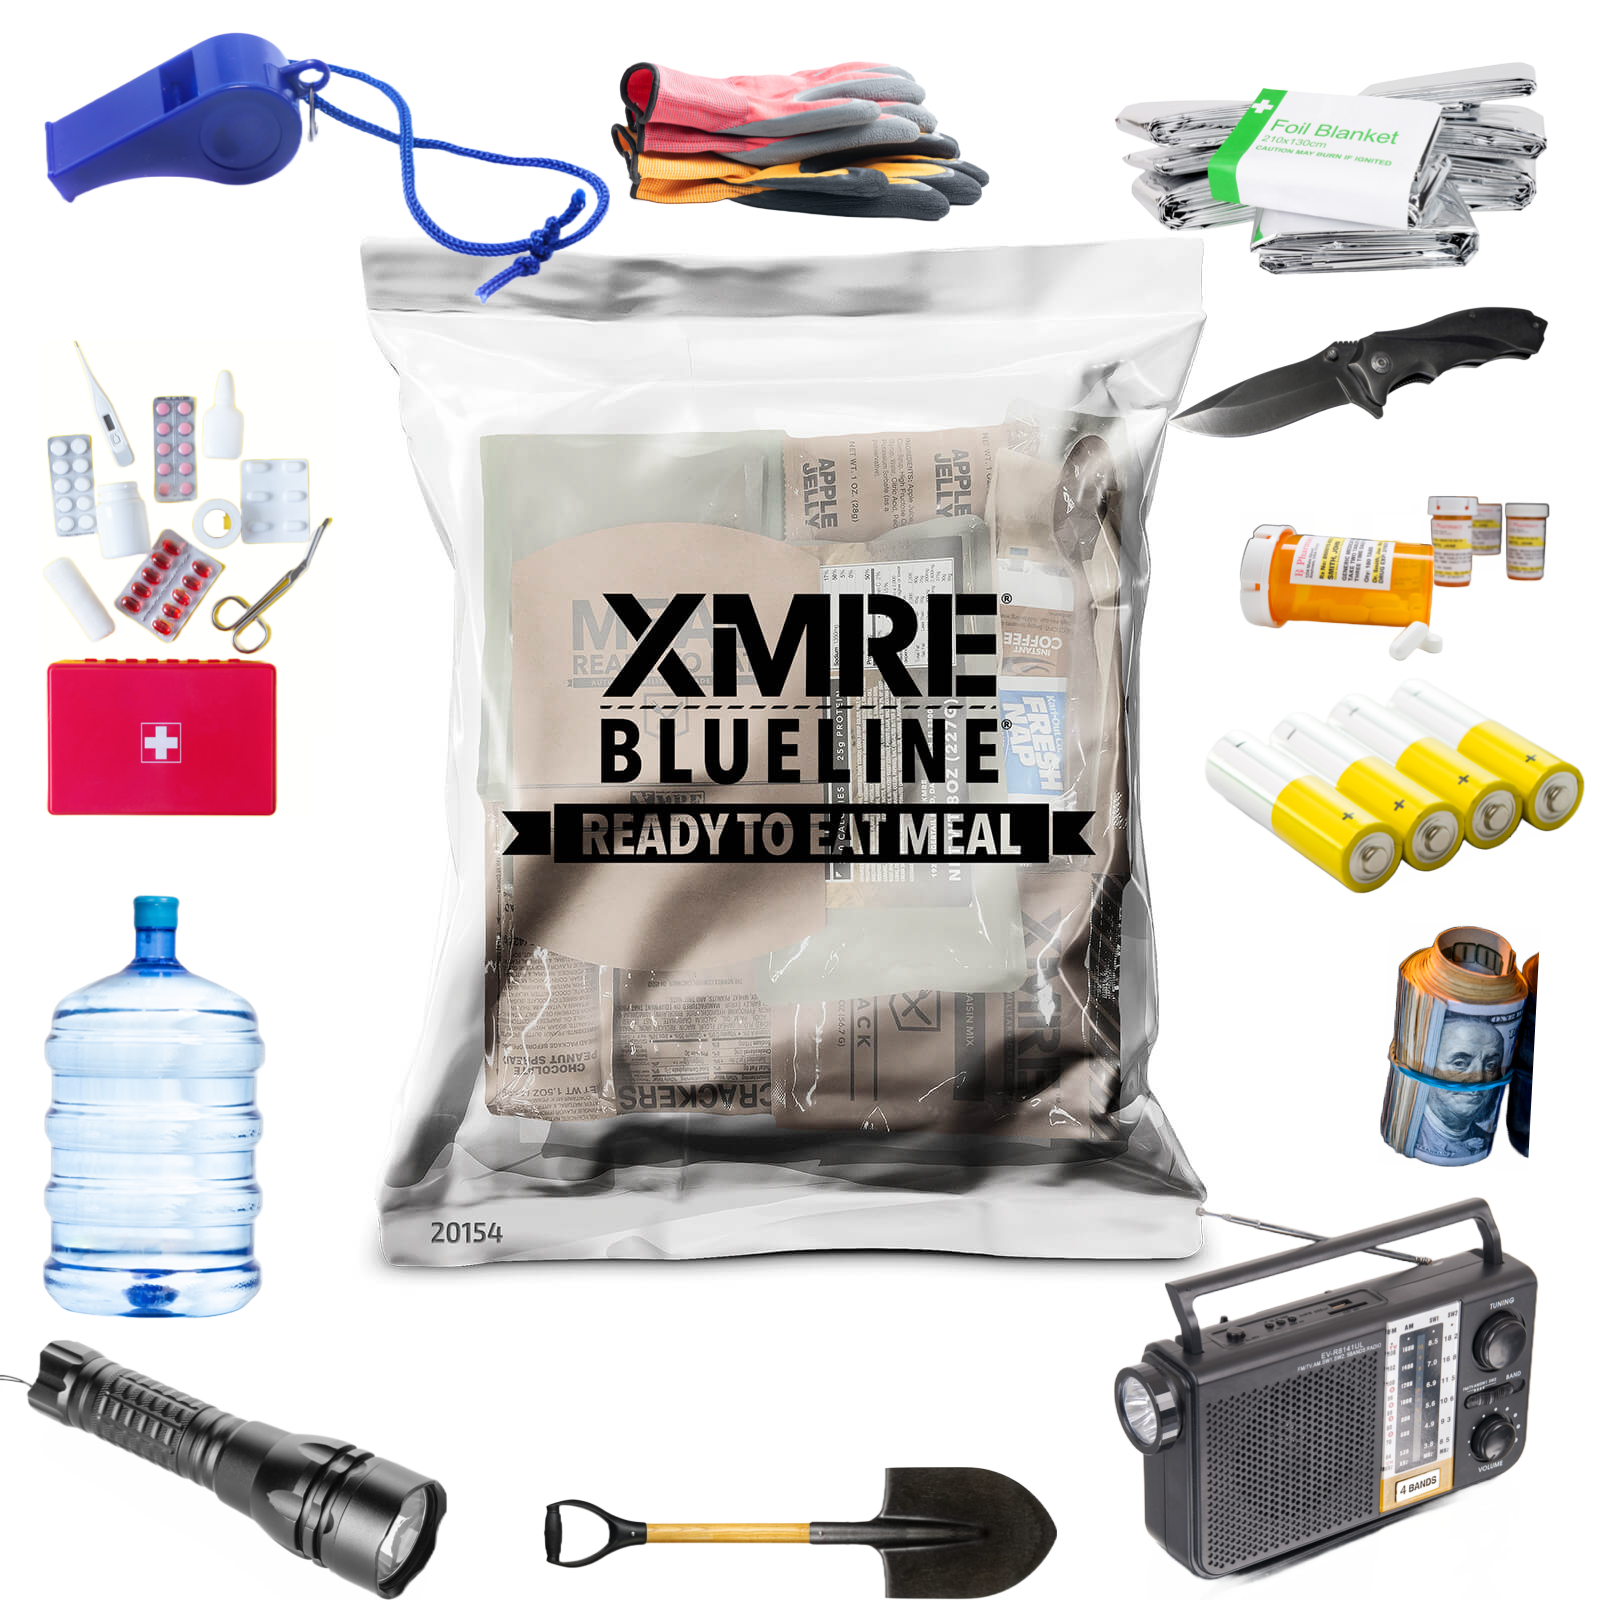 On-the-Go Preparedness: Why Your Car Emergency Kit Needs XMRE Meals